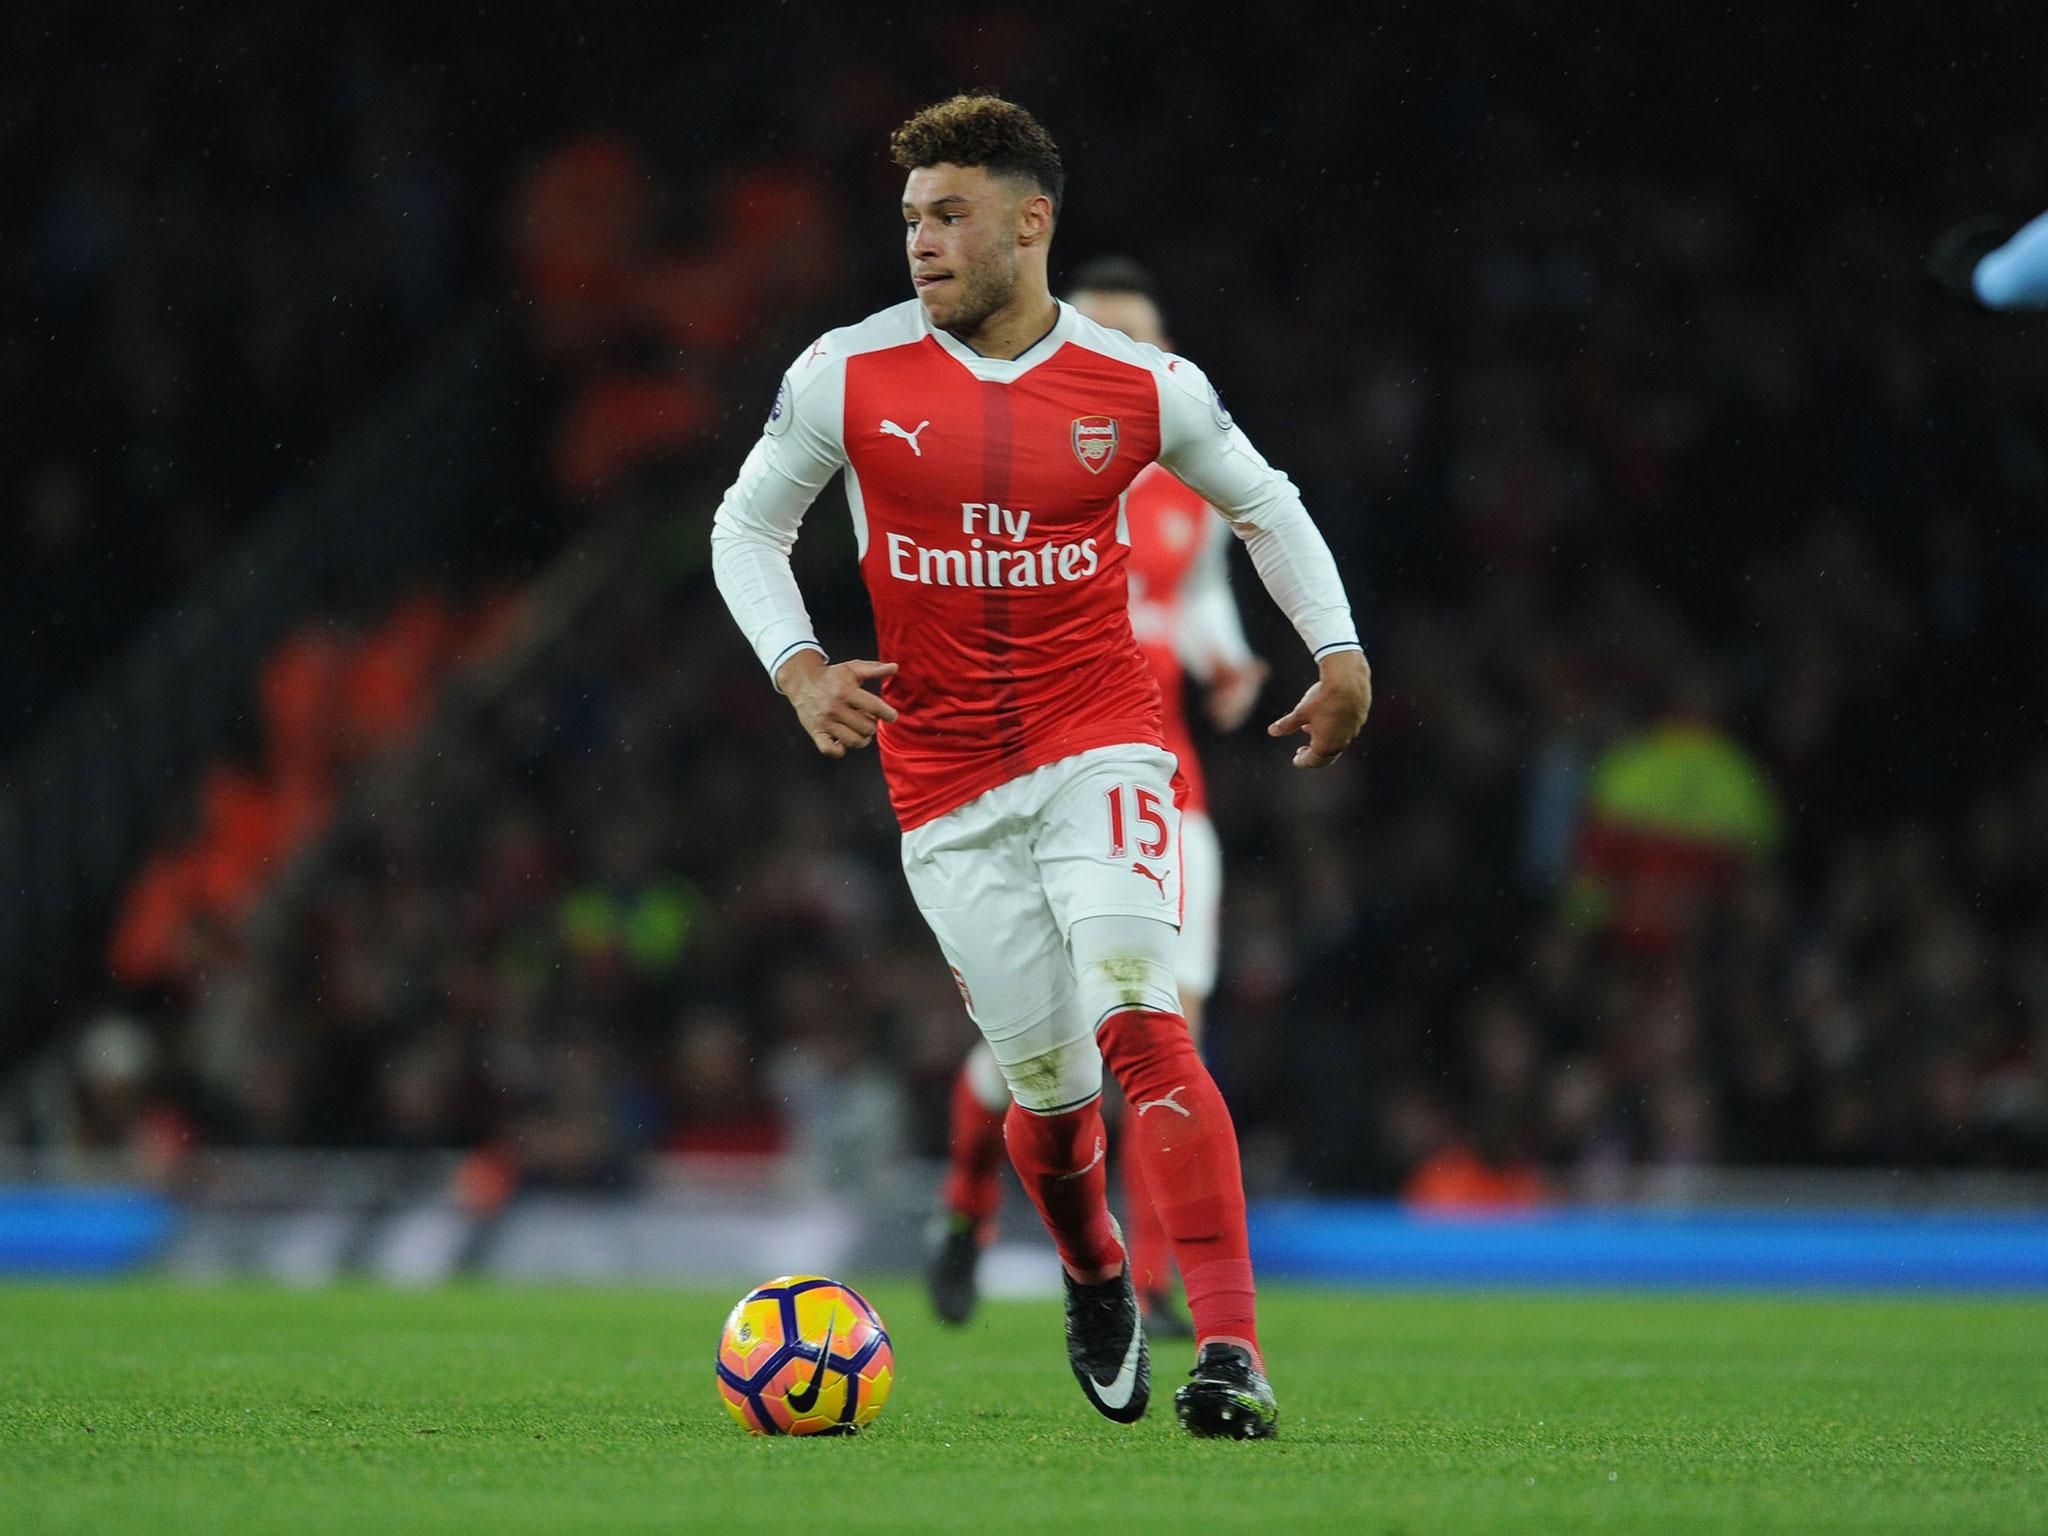 Alex Oxlade-Chamberlain is a January transfer target for Manchester City